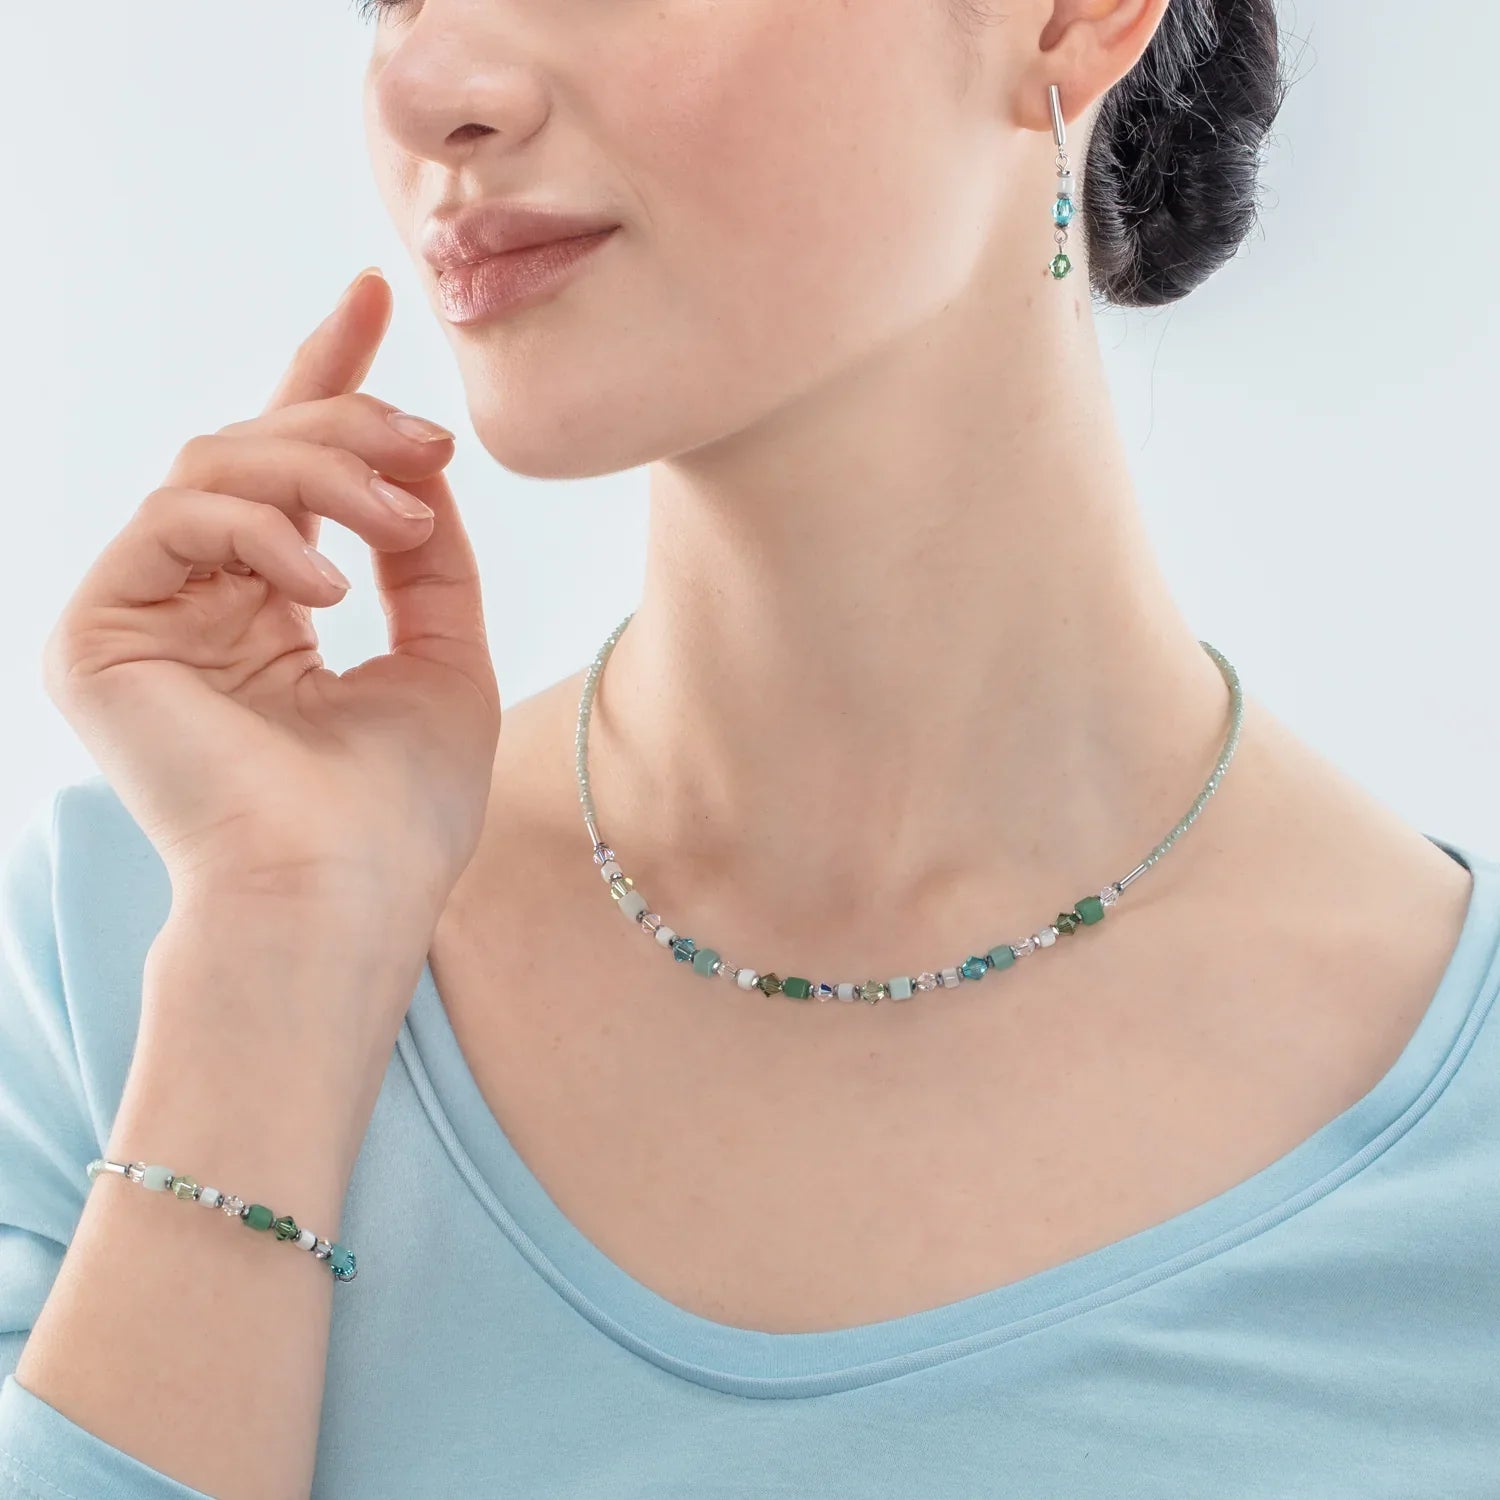 Shimmering Turquoise, Green, White & Silver Necklace 4239/10_0522